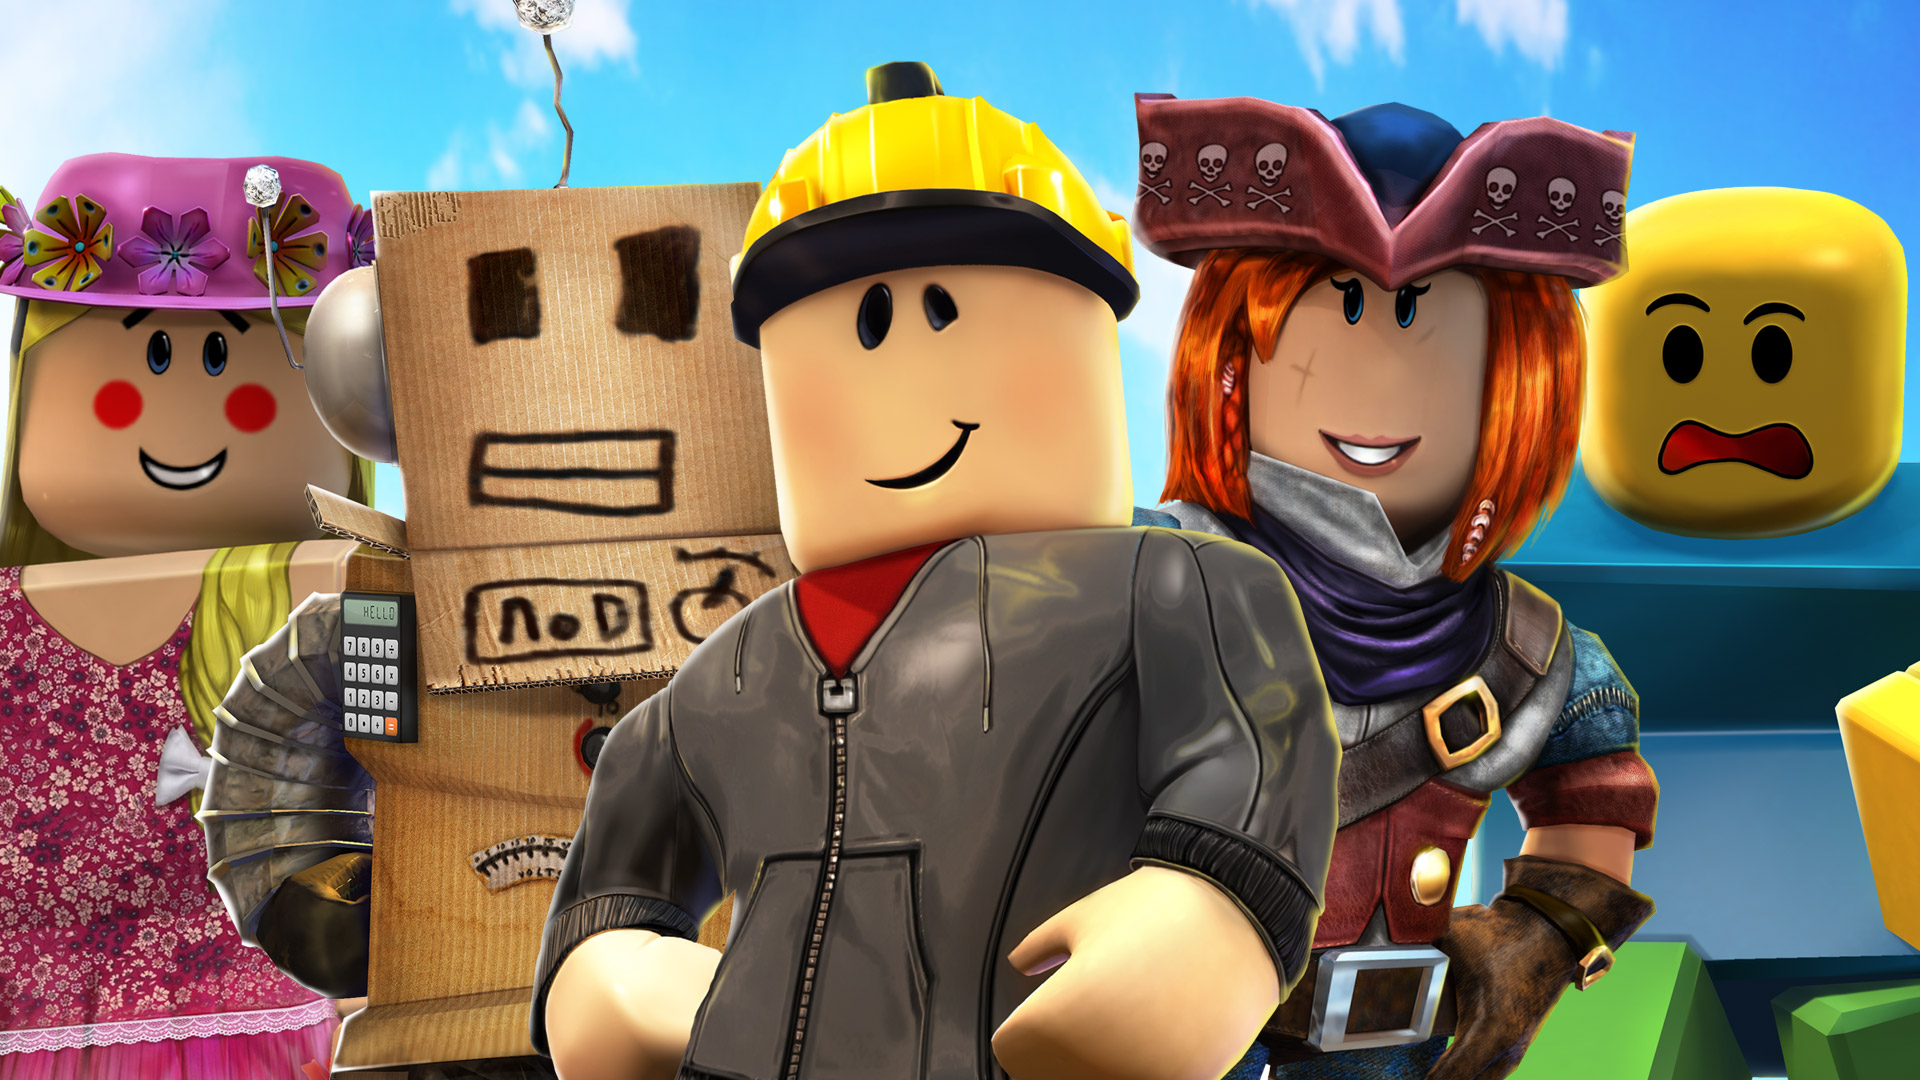 Play Roblox Online, Instantly in Browser